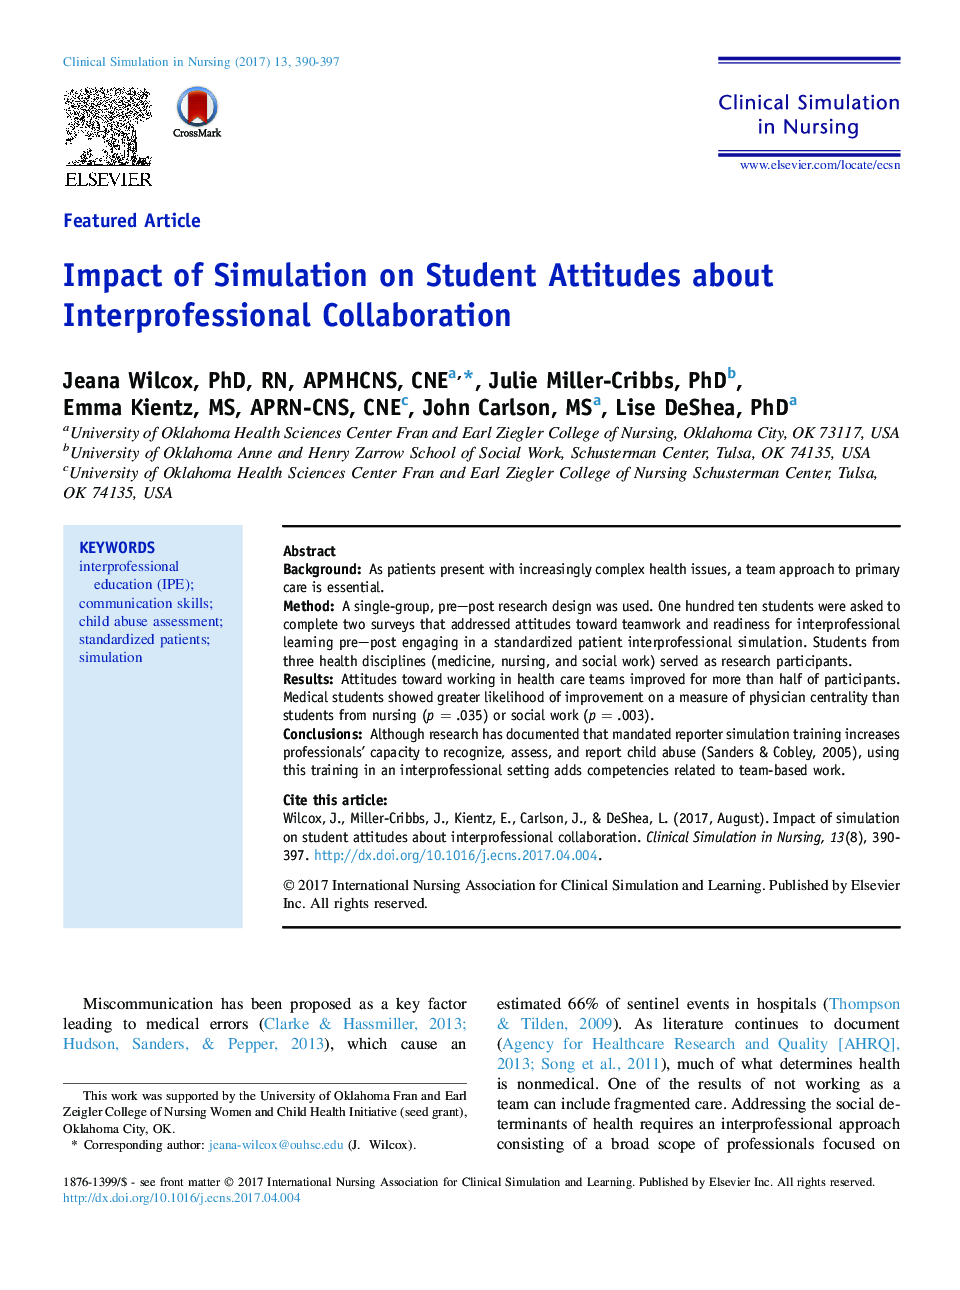 Impact of Simulation on Student Attitudes about Interprofessional Collaboration